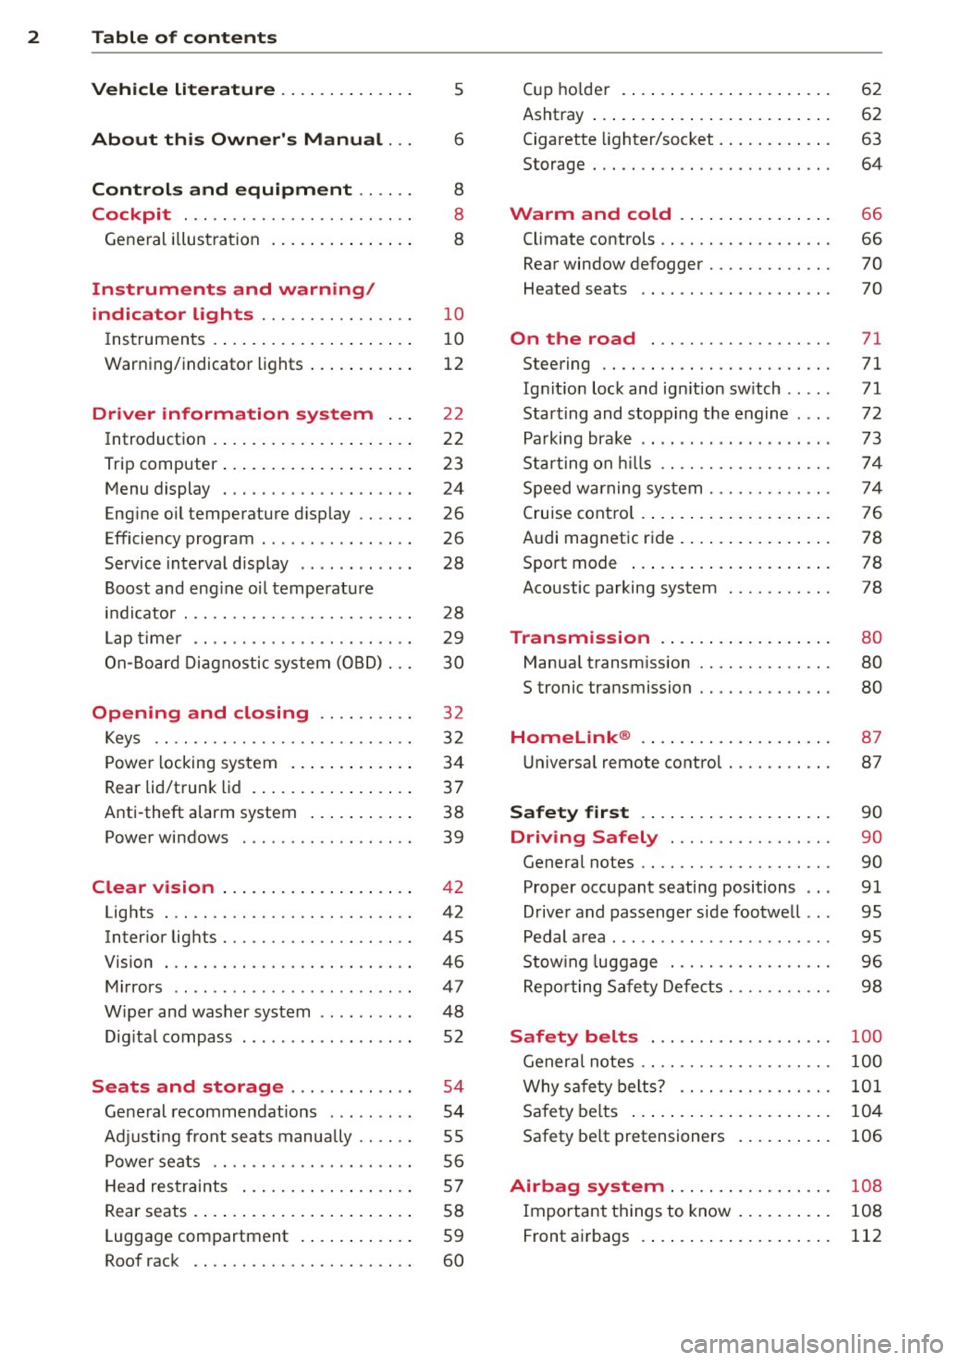 AUDI TT 2013  Owner´s Manual 2  Table  of  contents Vehicle  literature  ............. . 
About  this  Owners  Manual  ... 
Controls  and equipment  .. ...  . 
Cockpit  ................... ... . . 
General  illustration  .......